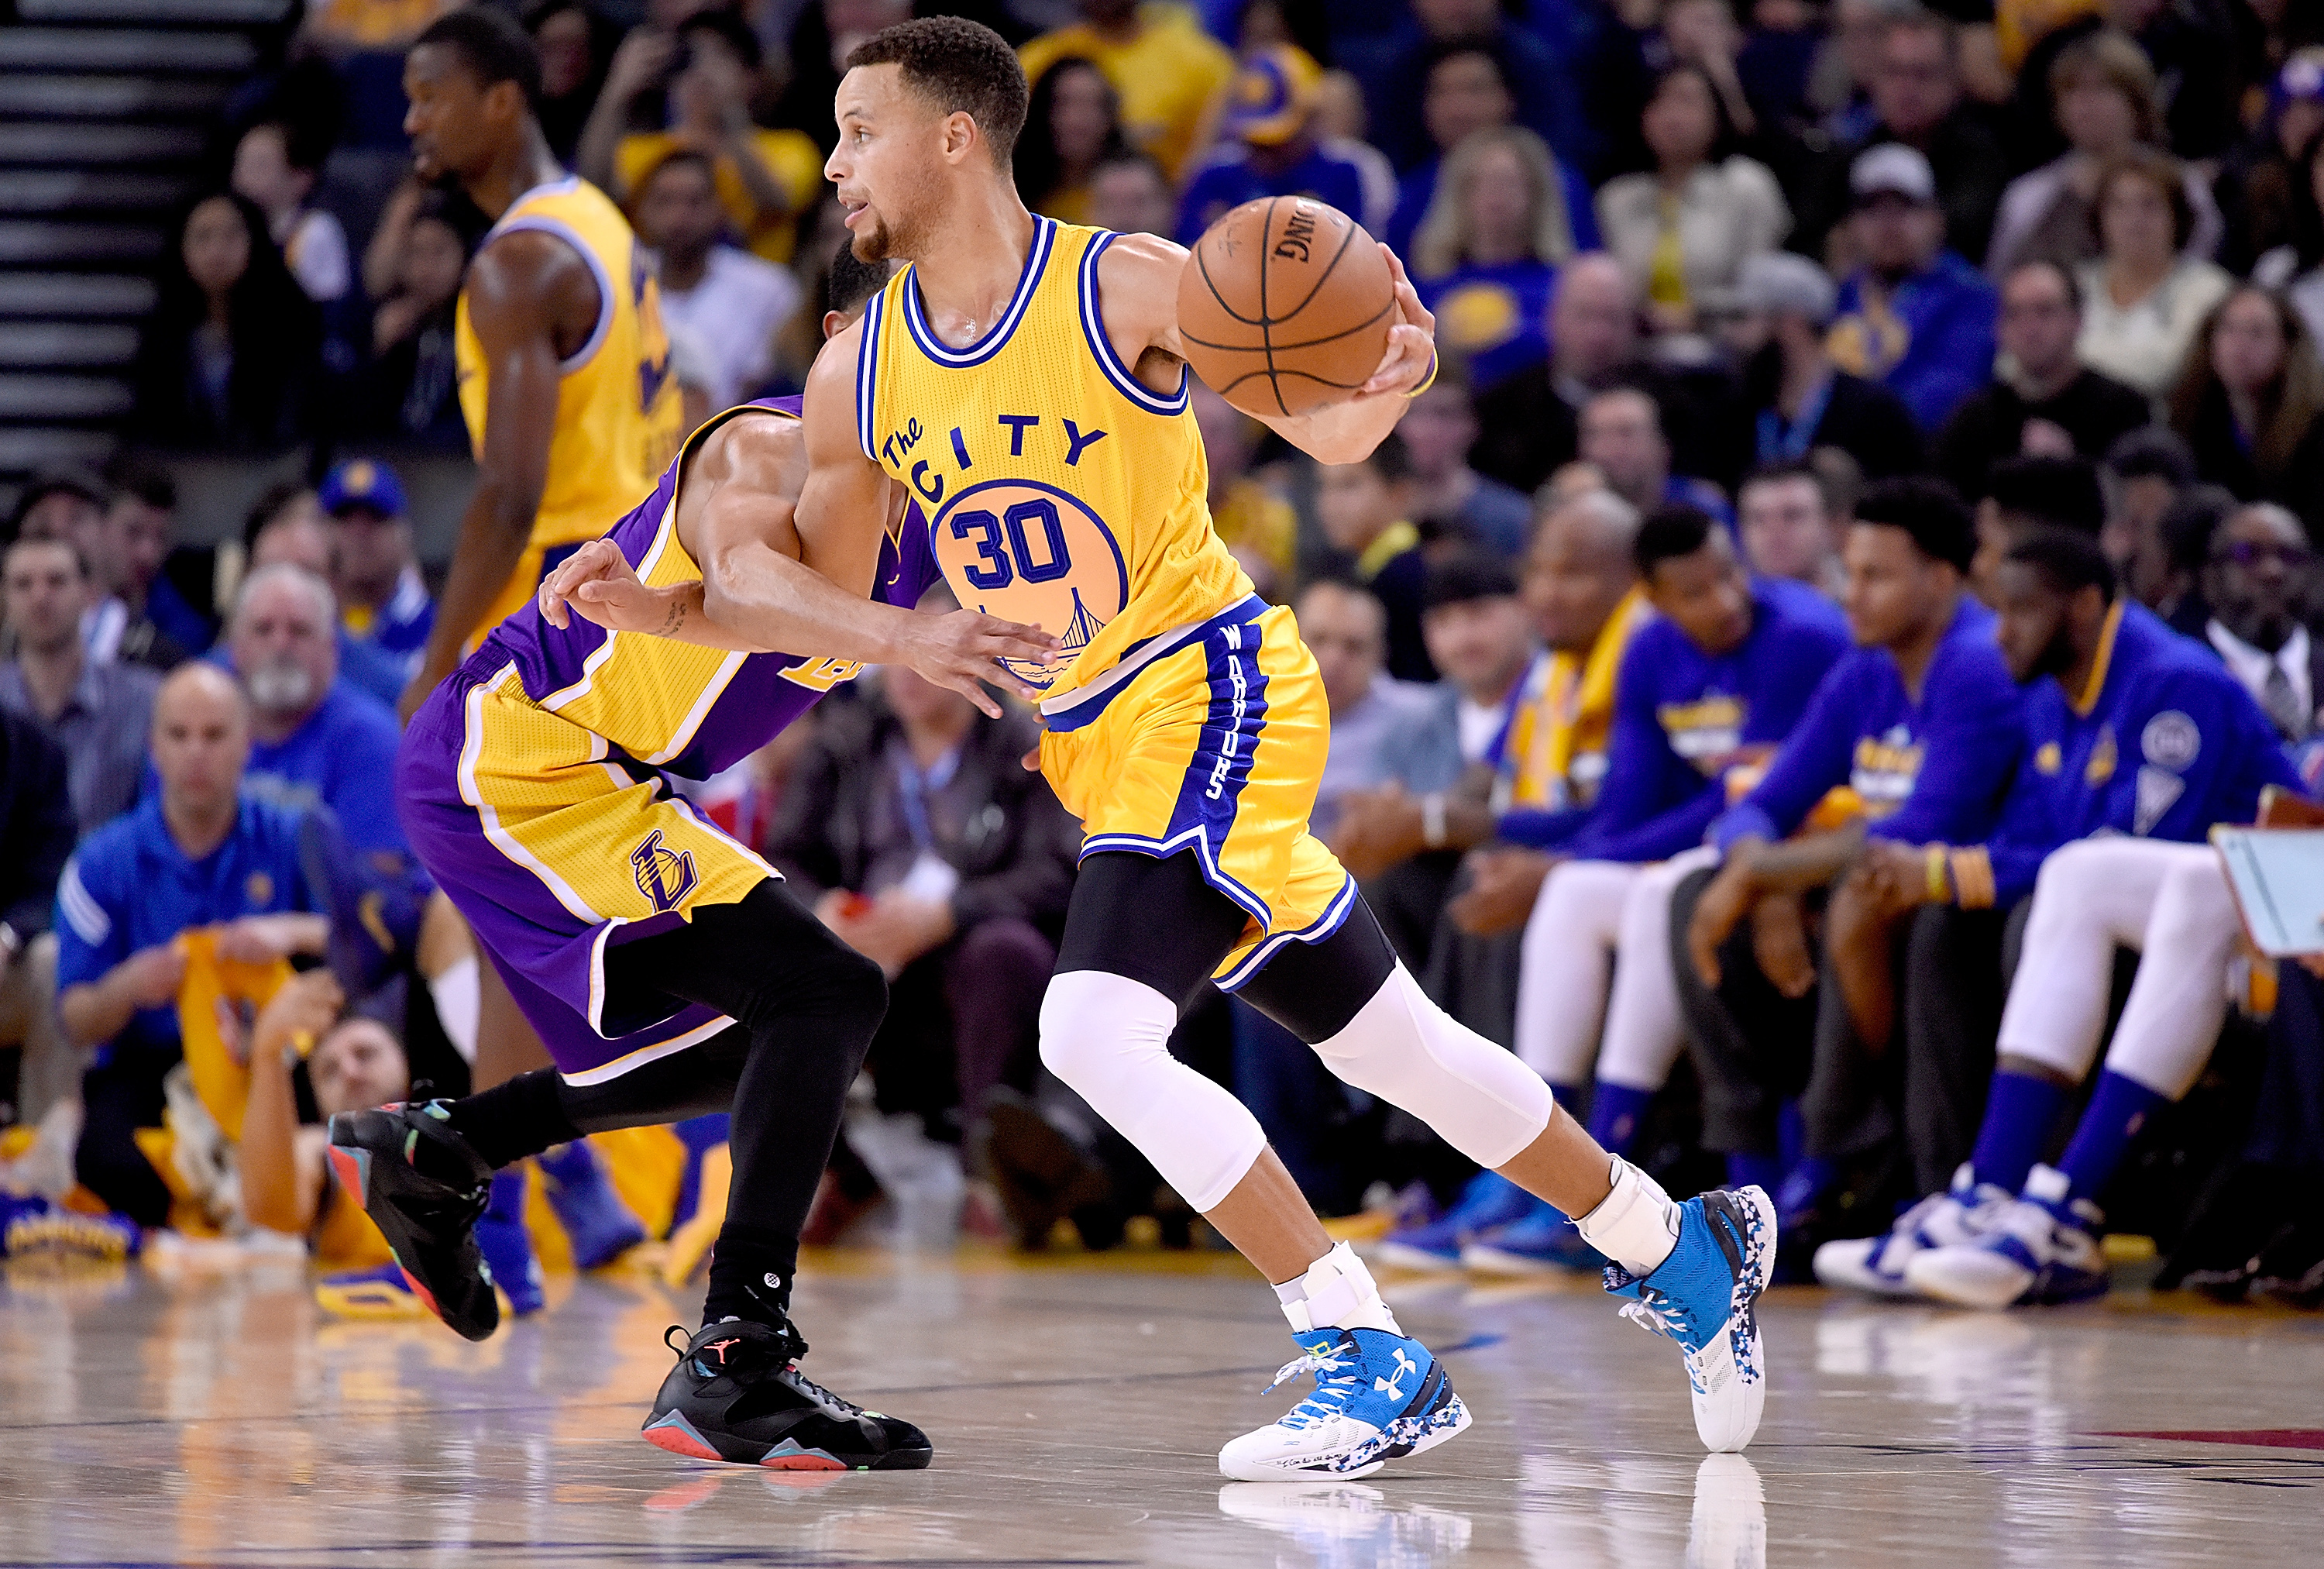 Where are the 2015 and 2016 Golden State Warriors now?